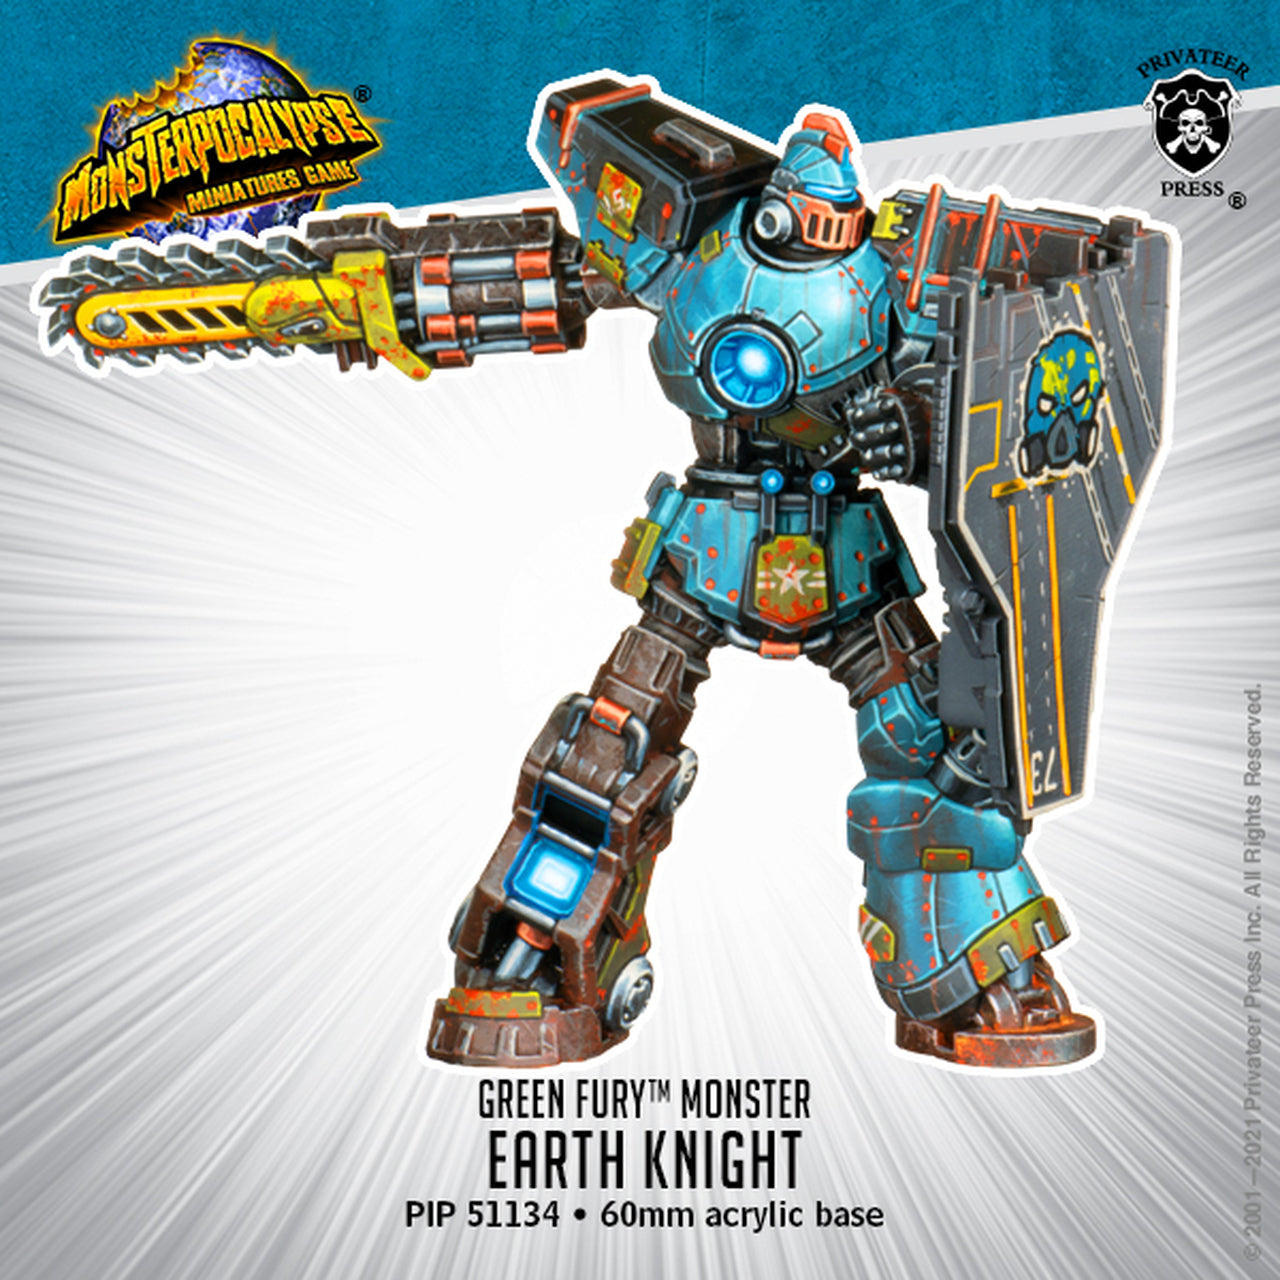 Monsterpocalypse - Green Fury Monster: Earth Knight - Bards & Cards